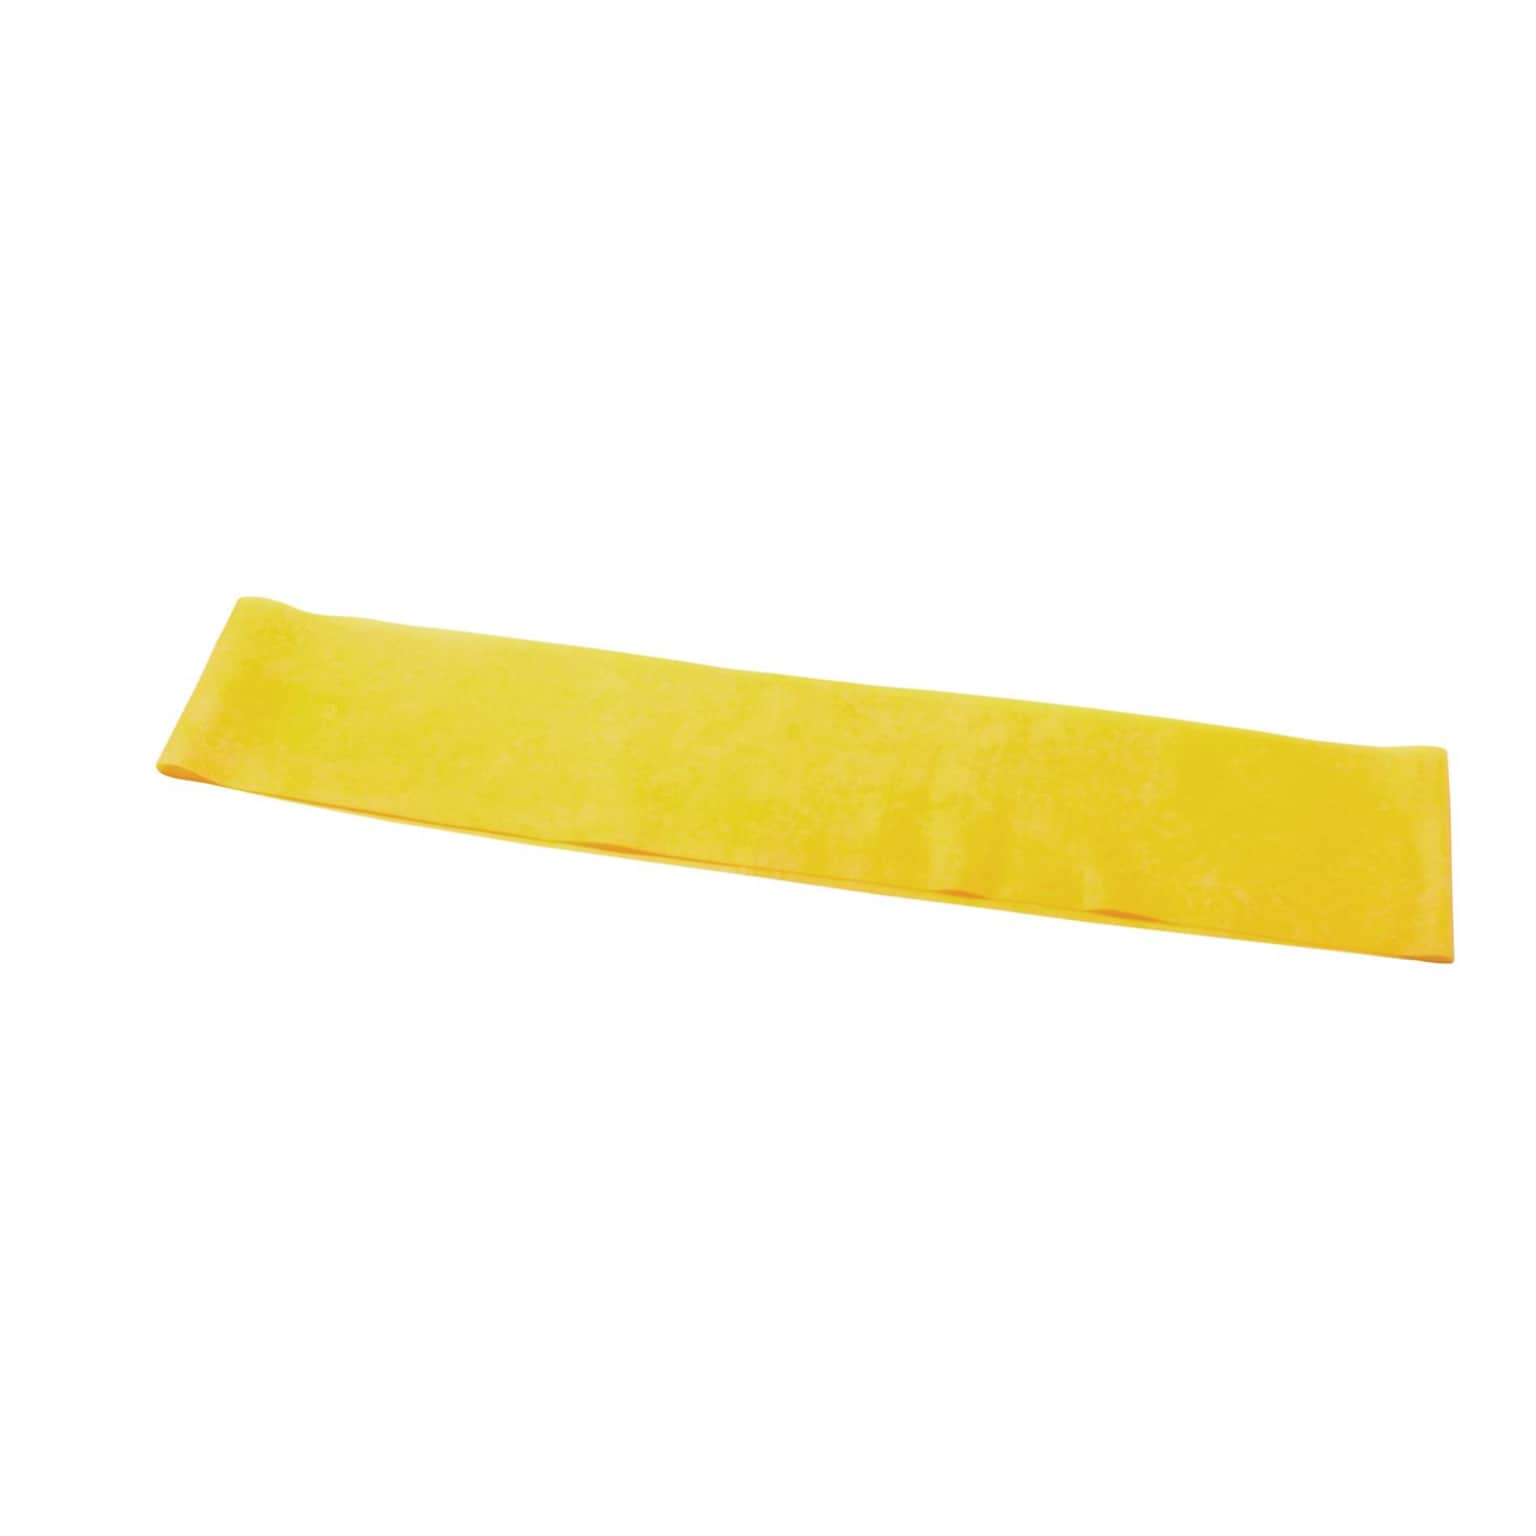 CanDo® Band Exercise Loop; 15 Long, Yellow, x-light